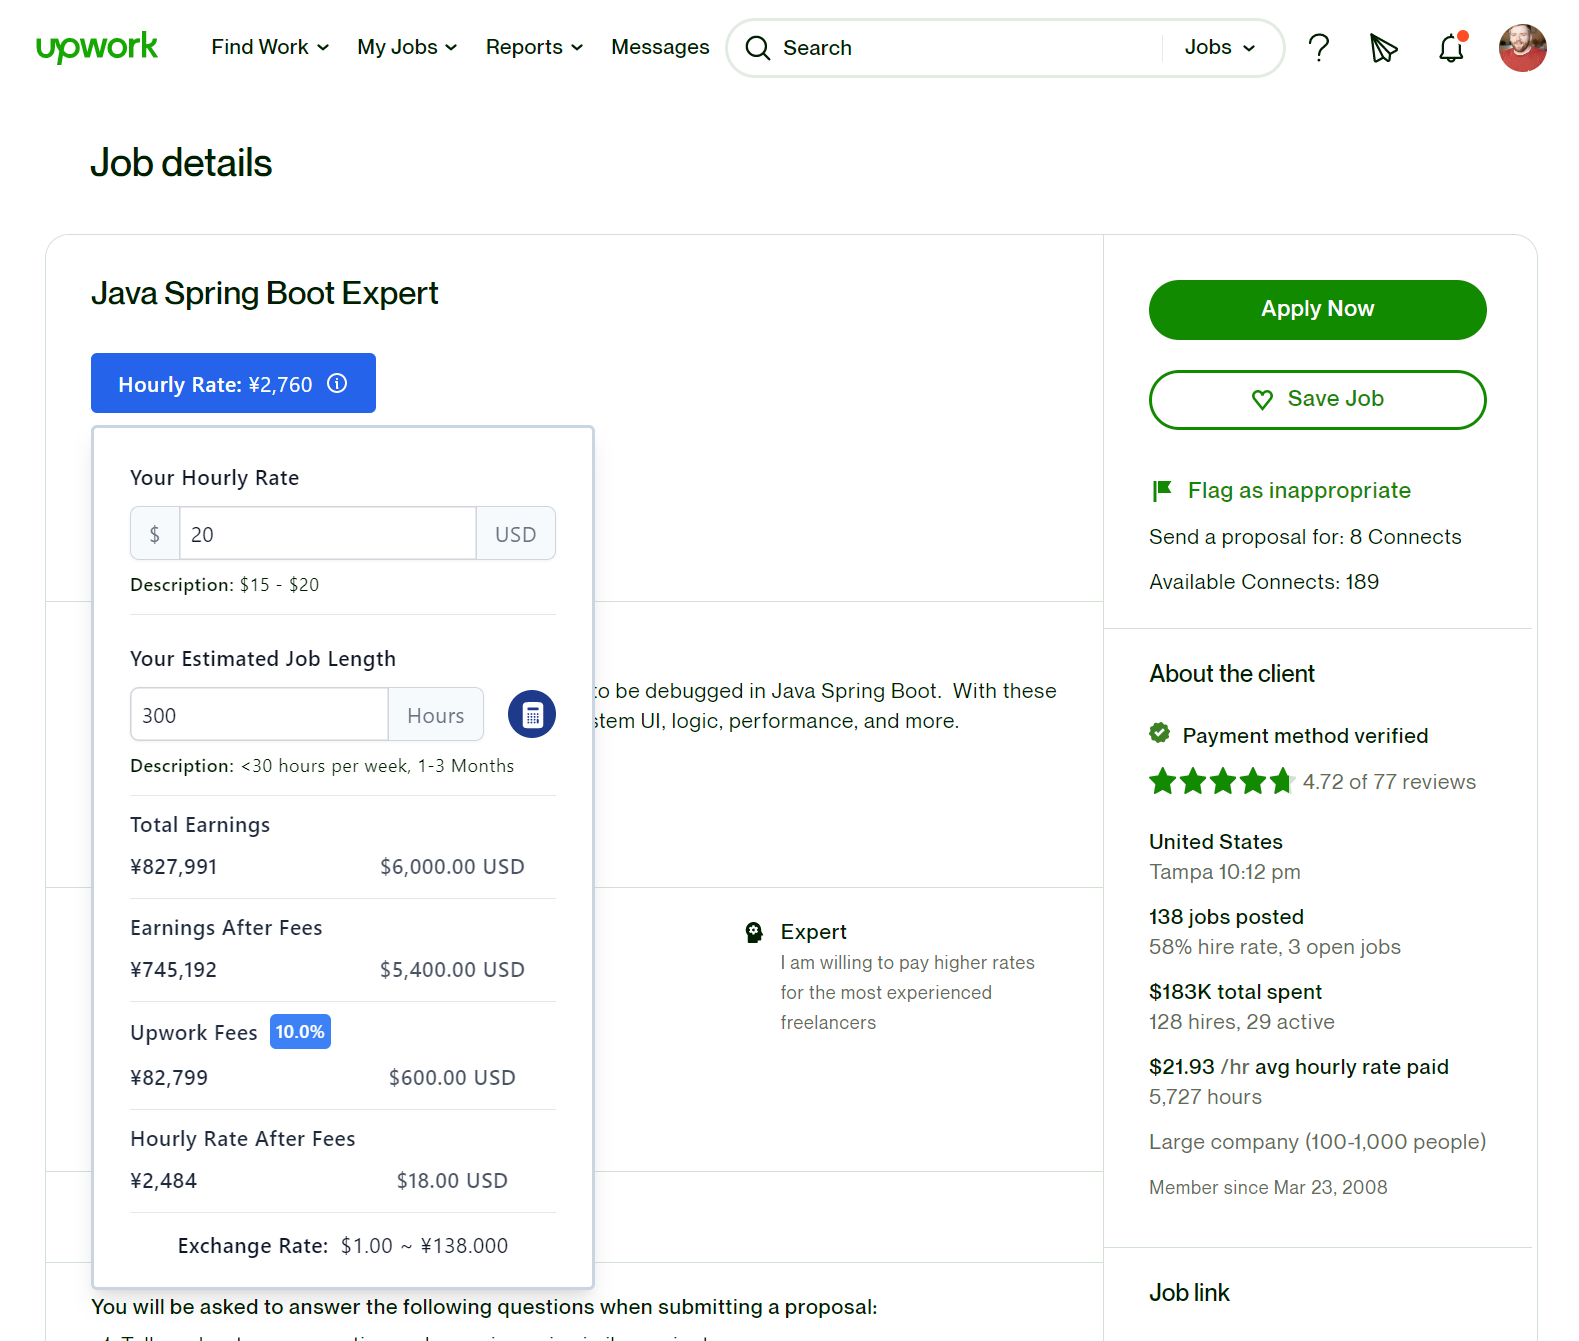  The image is a screenshot of an Upwork job listing page with the Freelance Pro Chrome Extension interface displaying an enhanced view of a job titled "Java Spring Boot Expert." The Freelance Pro extension adds a detailed breakdown of the job's financial aspects in both USD and Japanese Yen (¥).